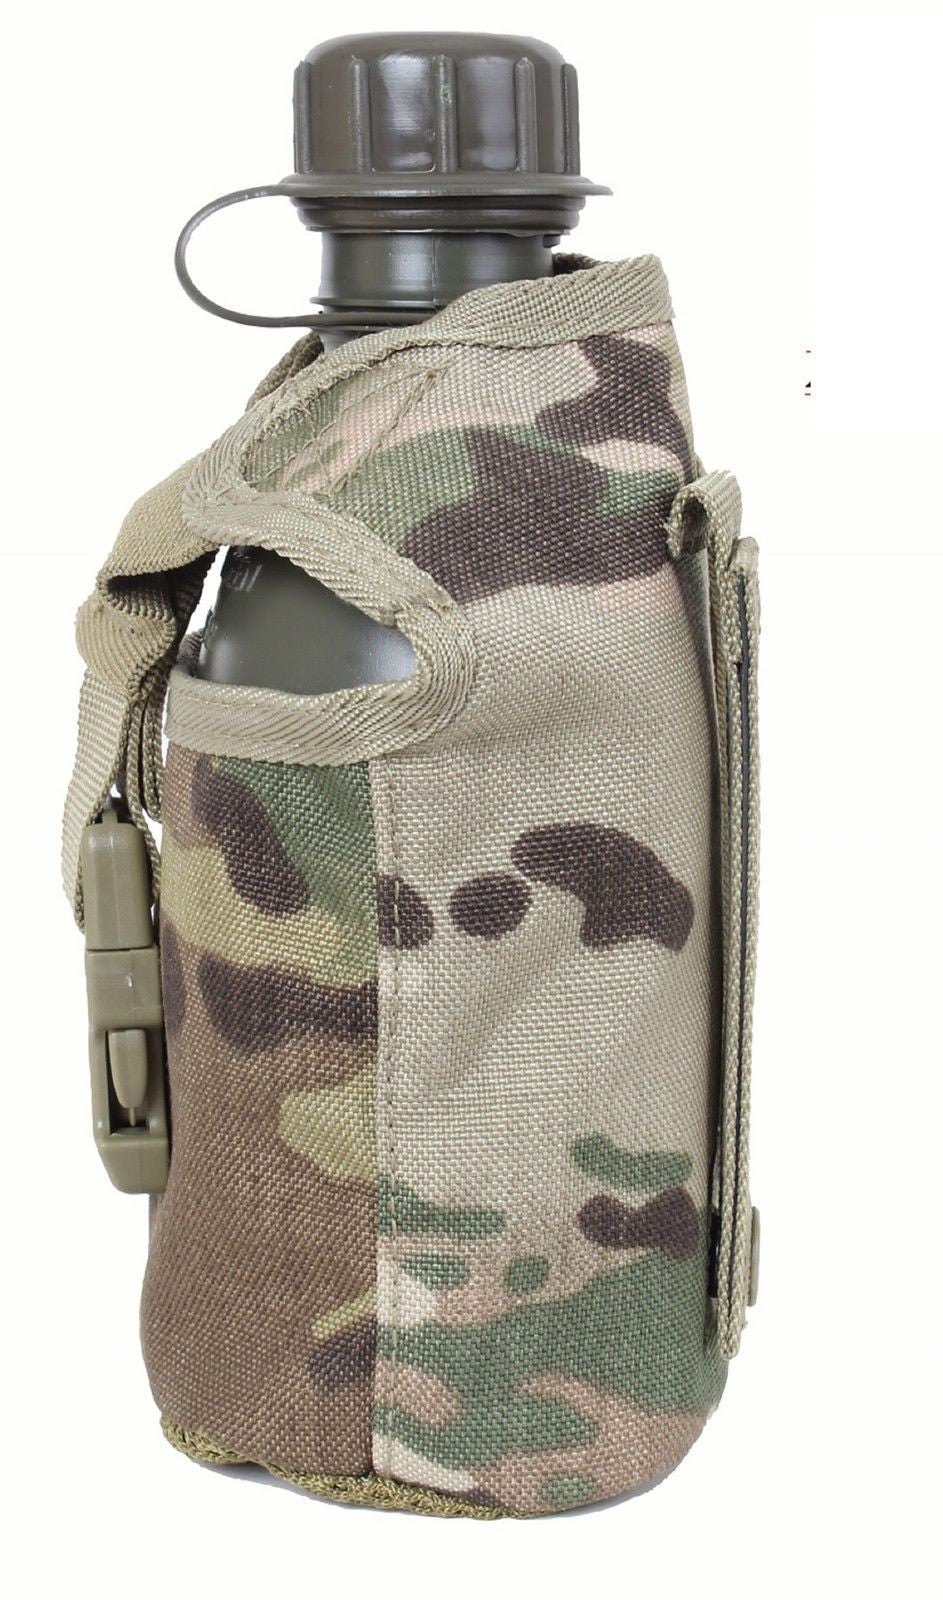 MultiCam Camouflage 1-Quart Canteen Cover w/ MOLLE Straps